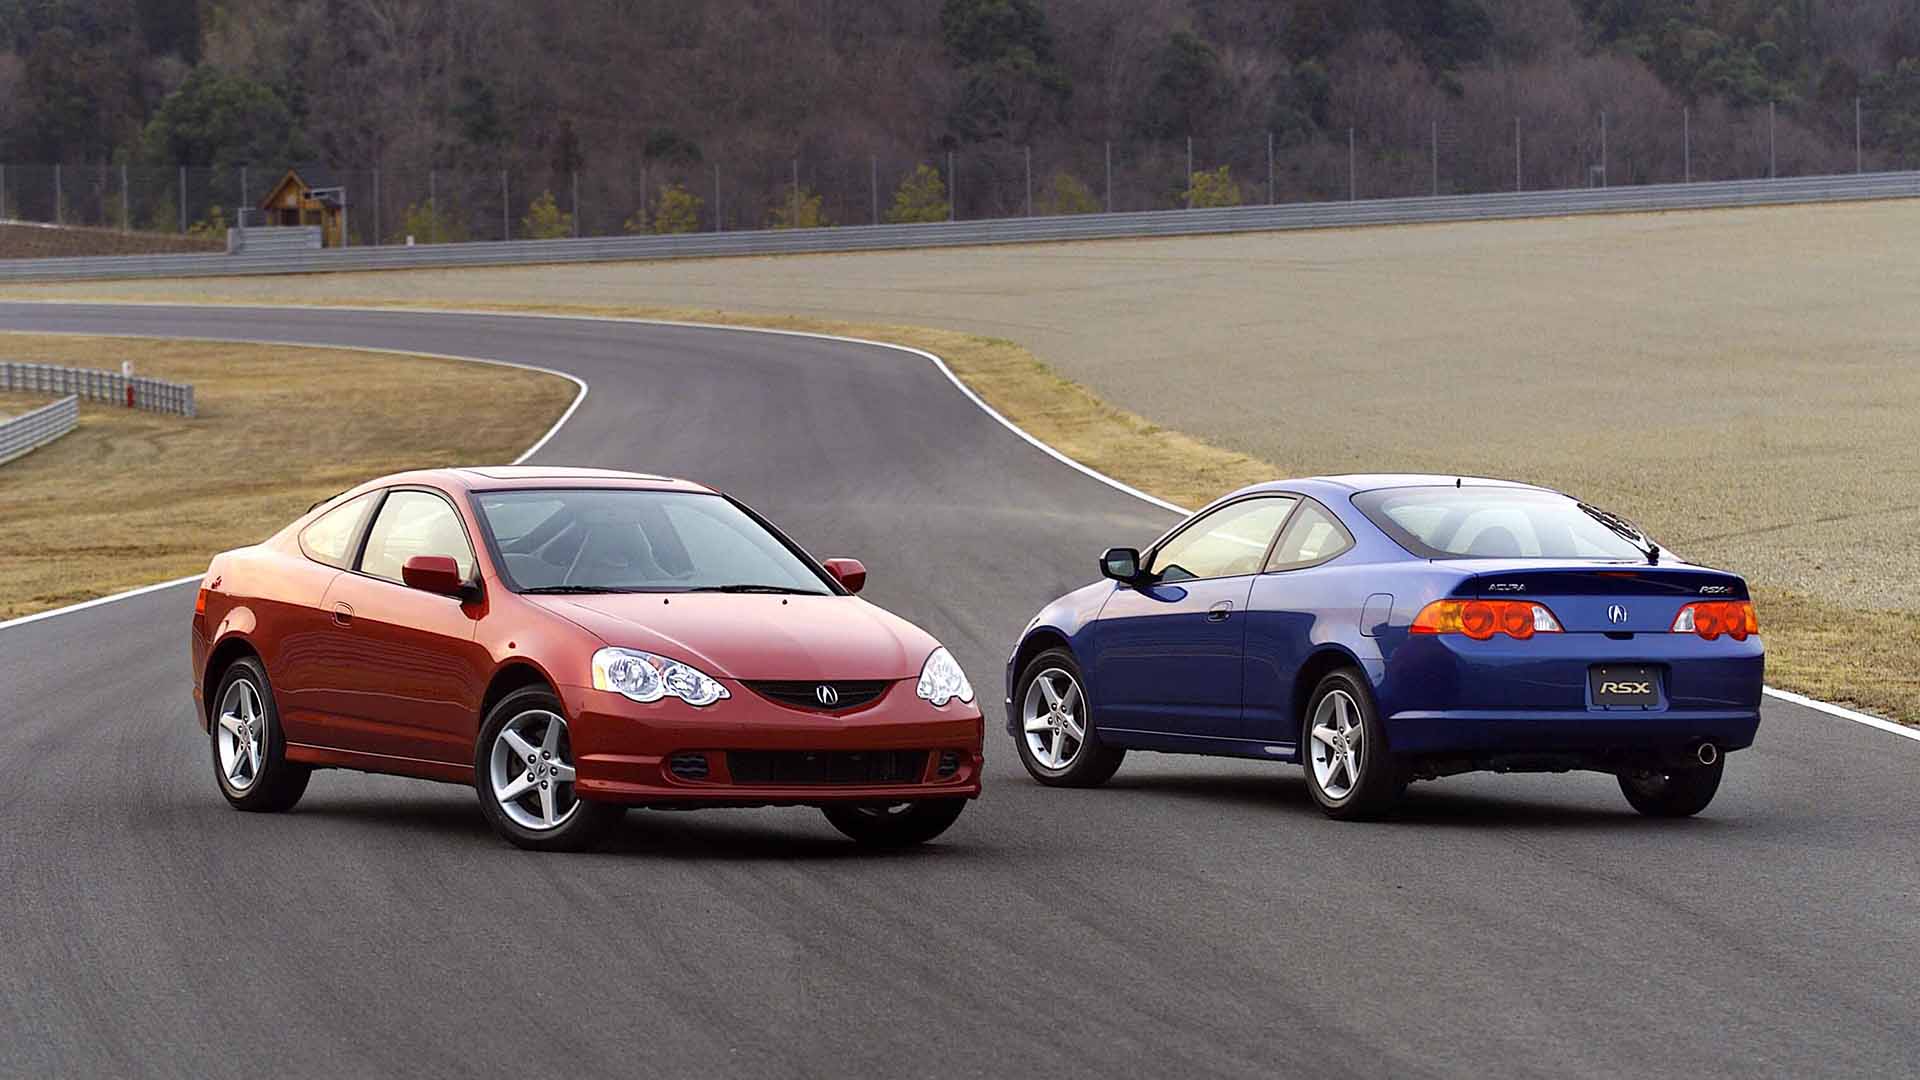 <p class="caption-title">2002-2004 Acura RSX Type S</p>, The Acura RSX Type S debuted for 2002 and received a refresh for 2005., <i>Acura</i>